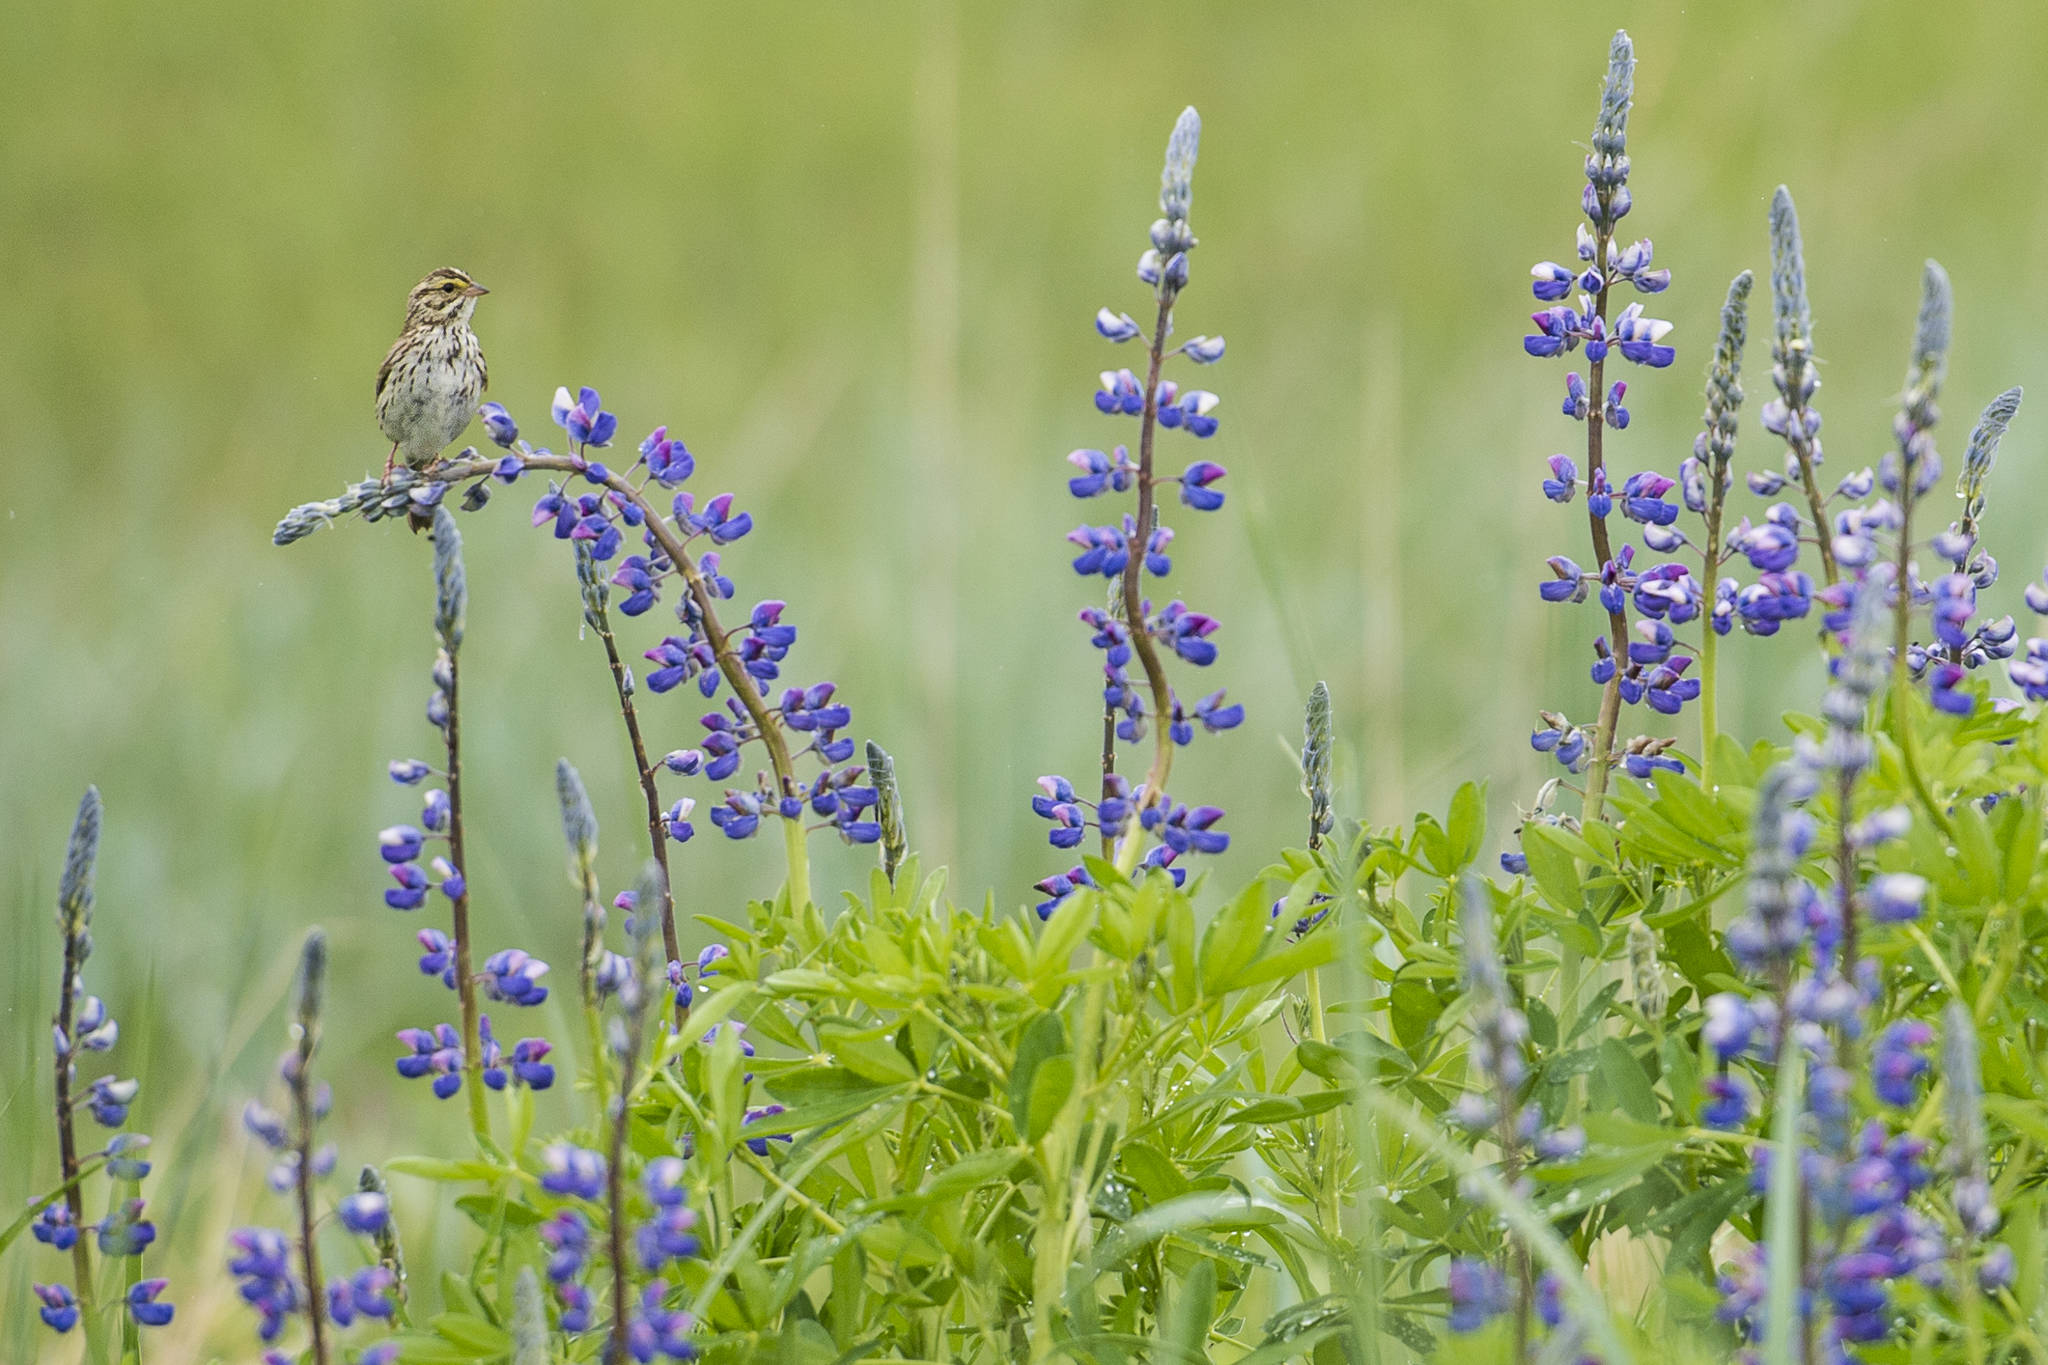 A Savannah sparrow uses lupine blossoms as a perch in the Mendenhall Wetlands State Game Refuge on Monday, June 3, 2019. (Michael Penn | Juneau Empire)